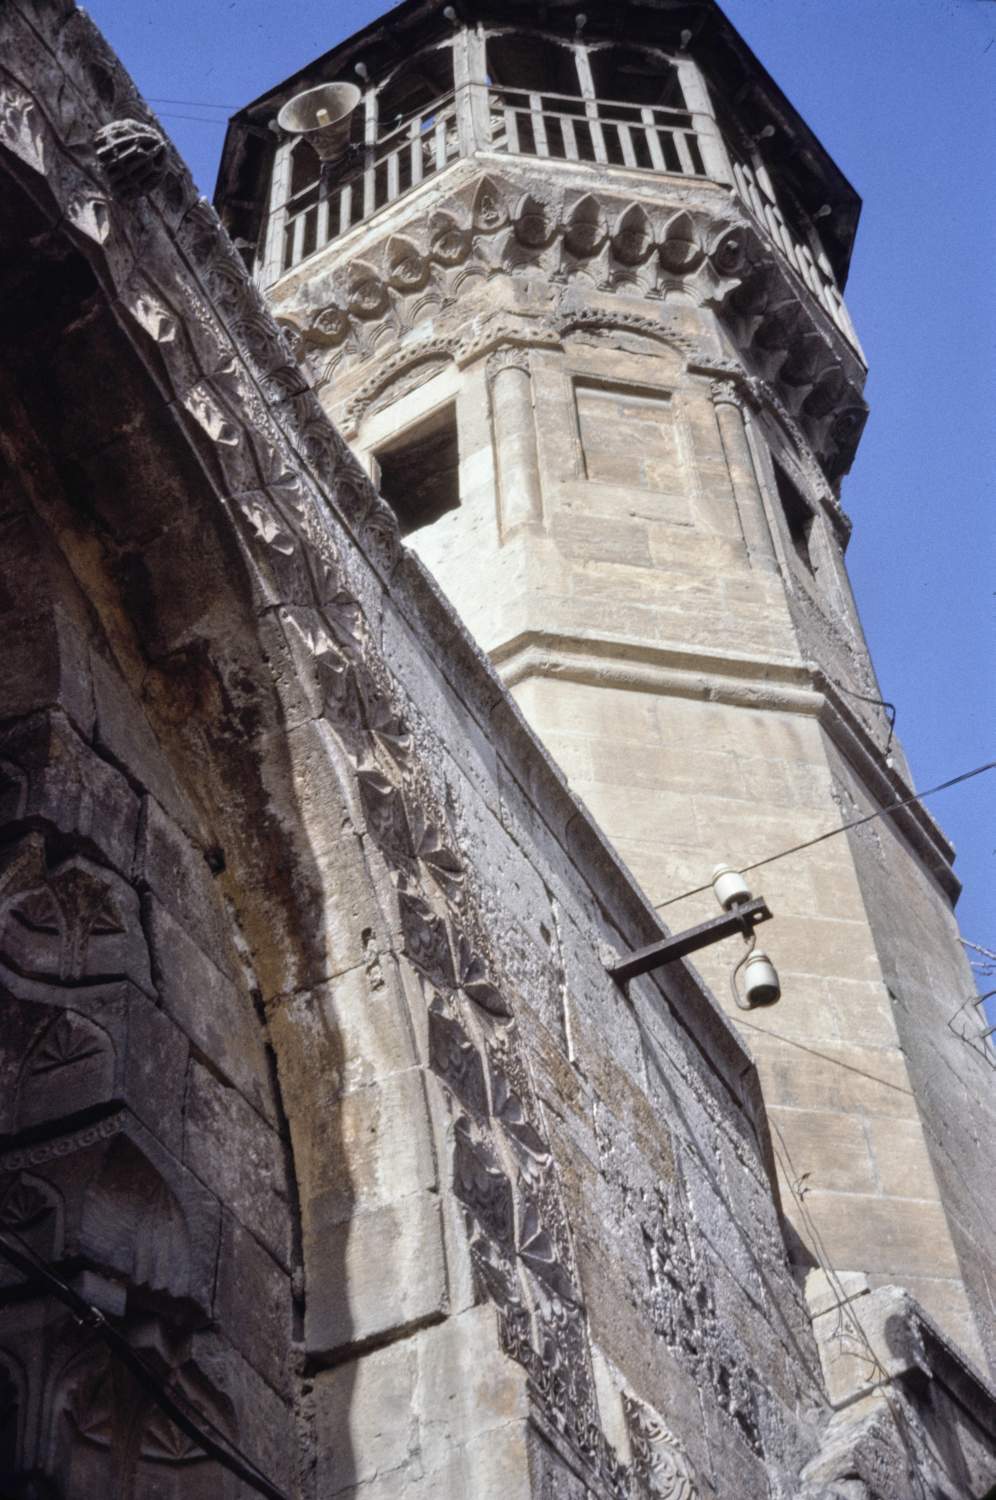 View of minaret from exterior of entry portal.